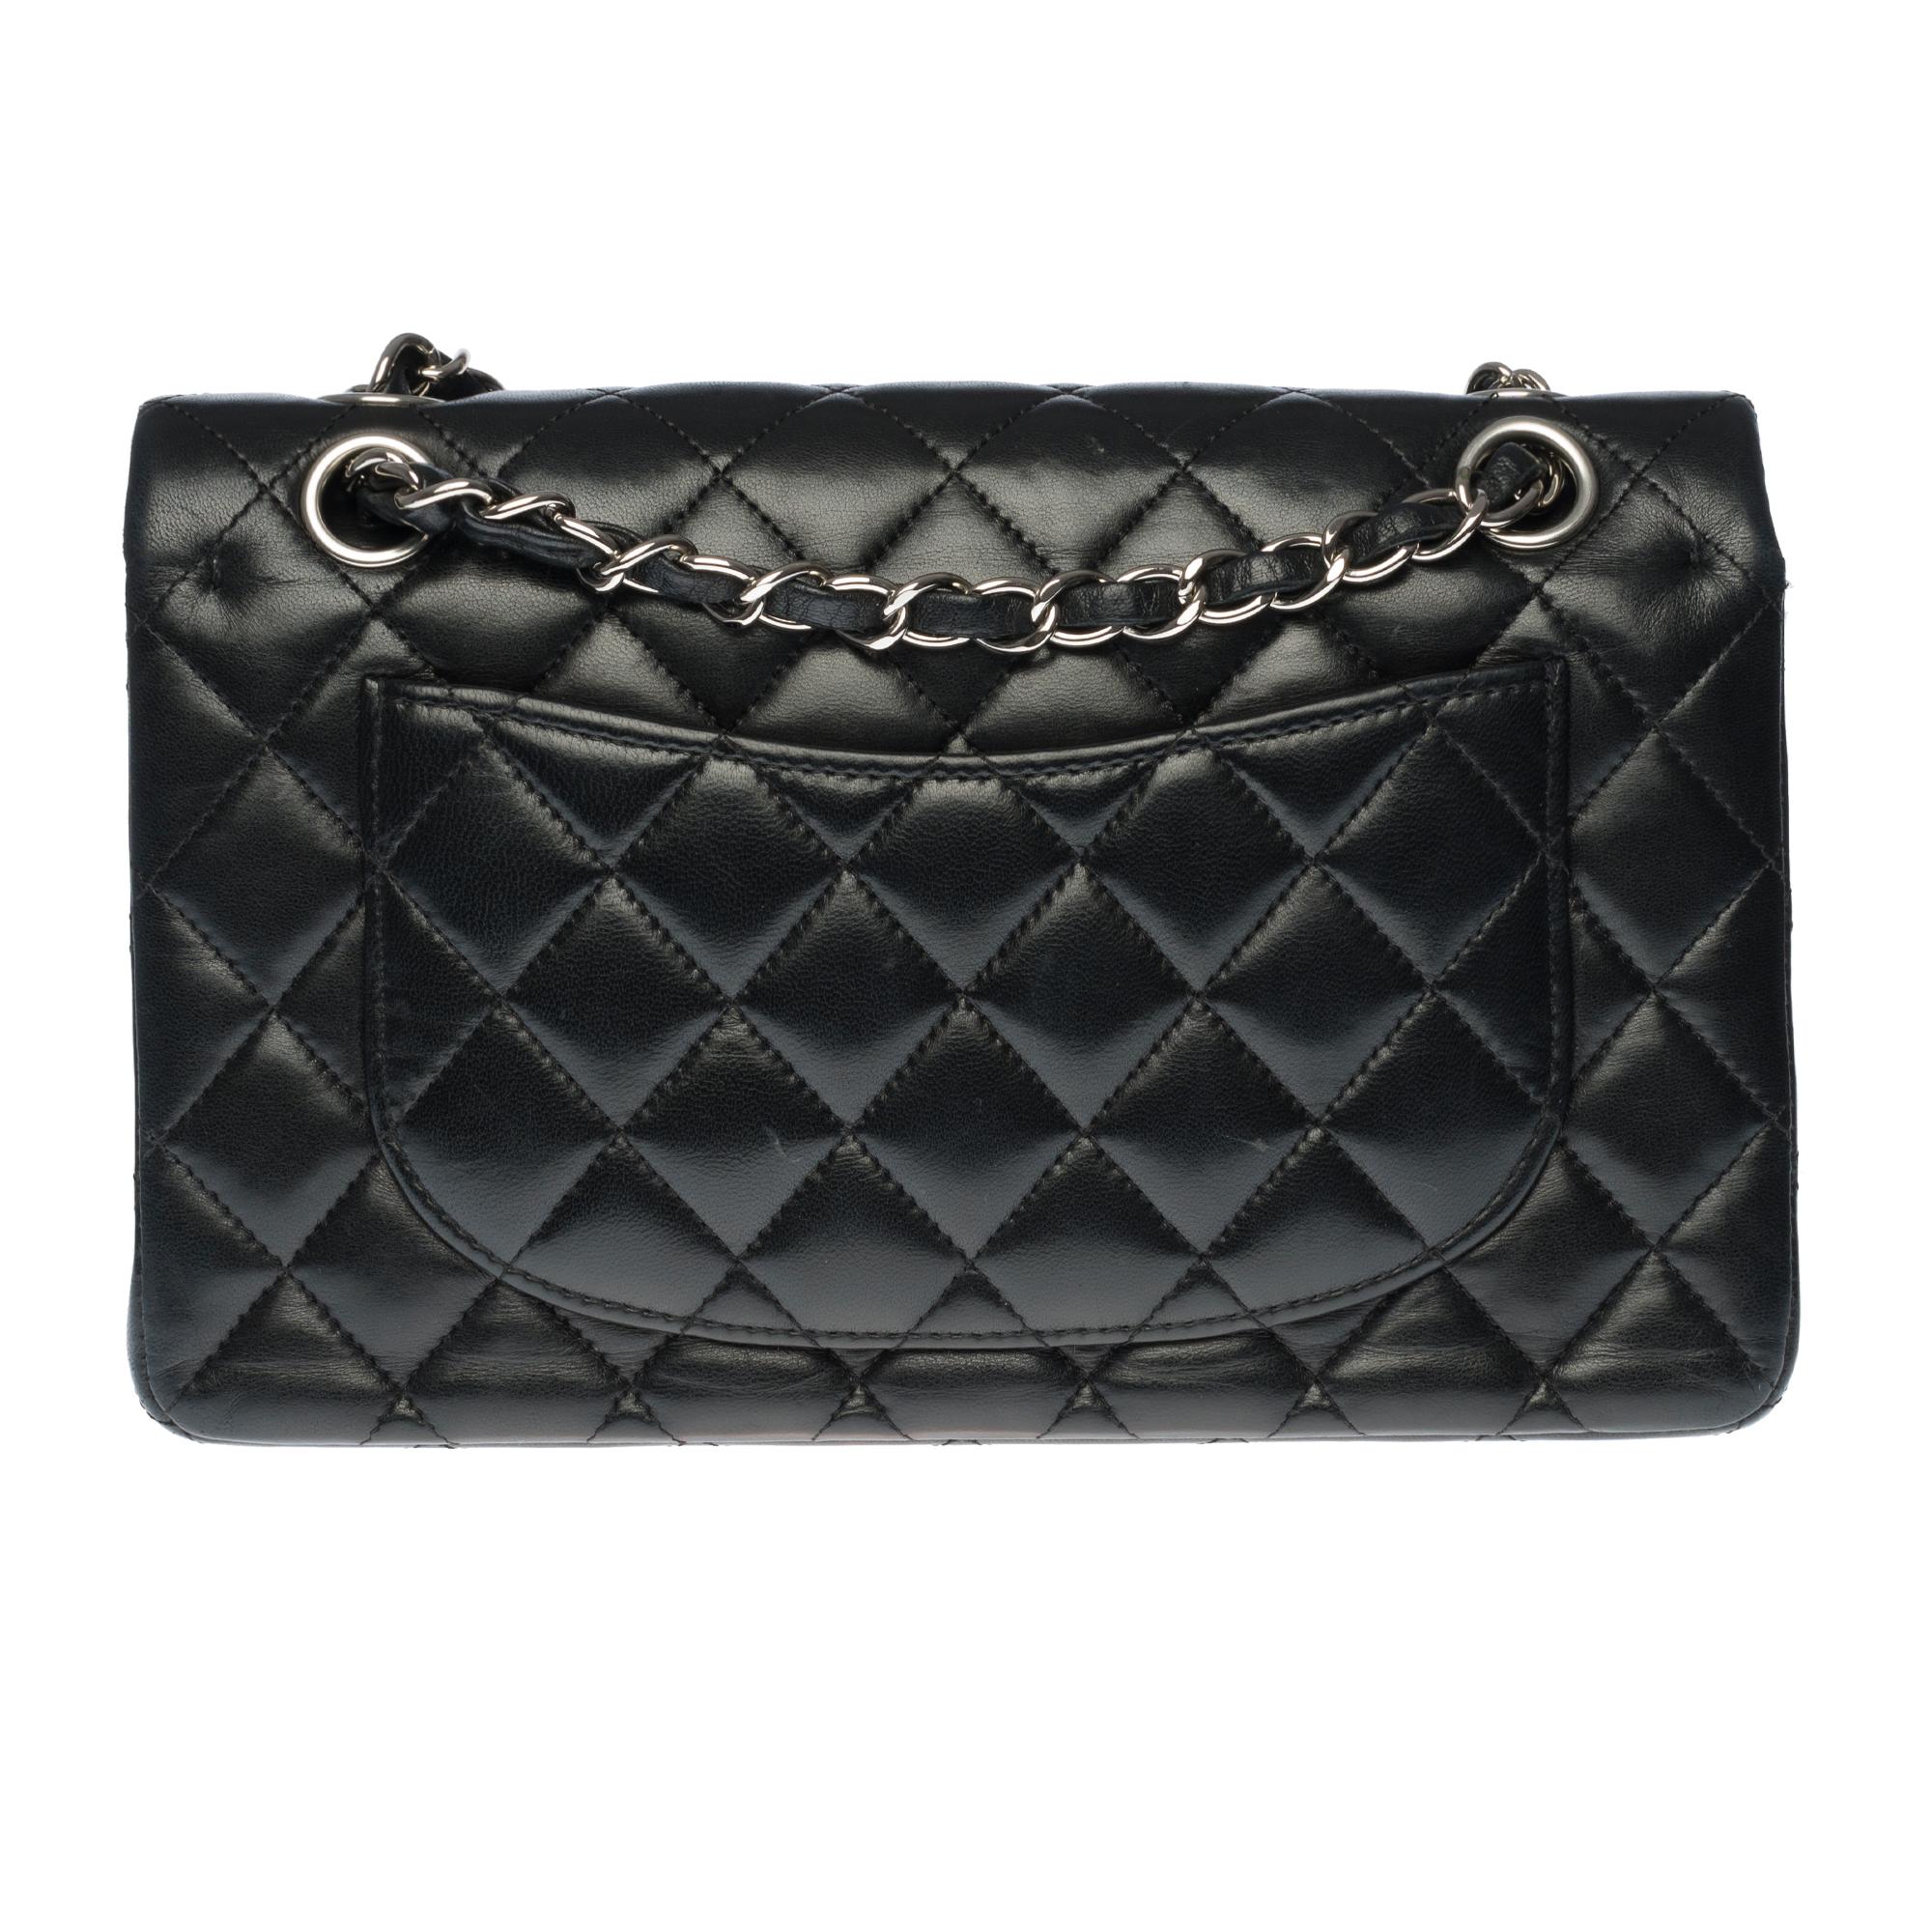 The coveted Chanel Timeless 23cm double flap bag in quilted black lambskin leather, silver metal hardware, silver metal chain intertwined with black leather for a shoulder and shoulder strap
Pocket on the back of the bag.
Closure with flap, silver